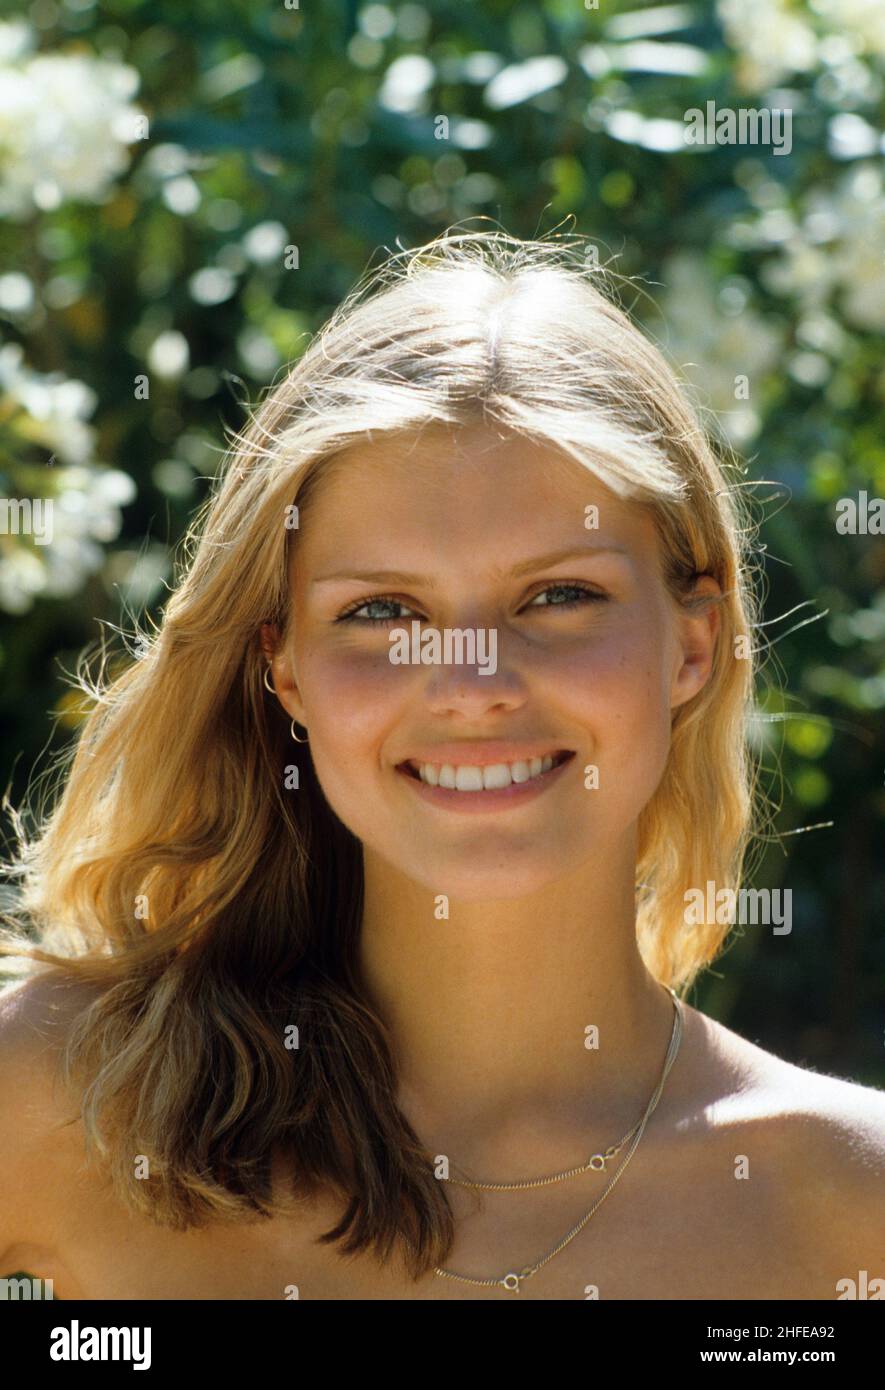 blond hair expressive smiling happy young woman Portrait looking front camera underlight green natural foliage background Stock Photo